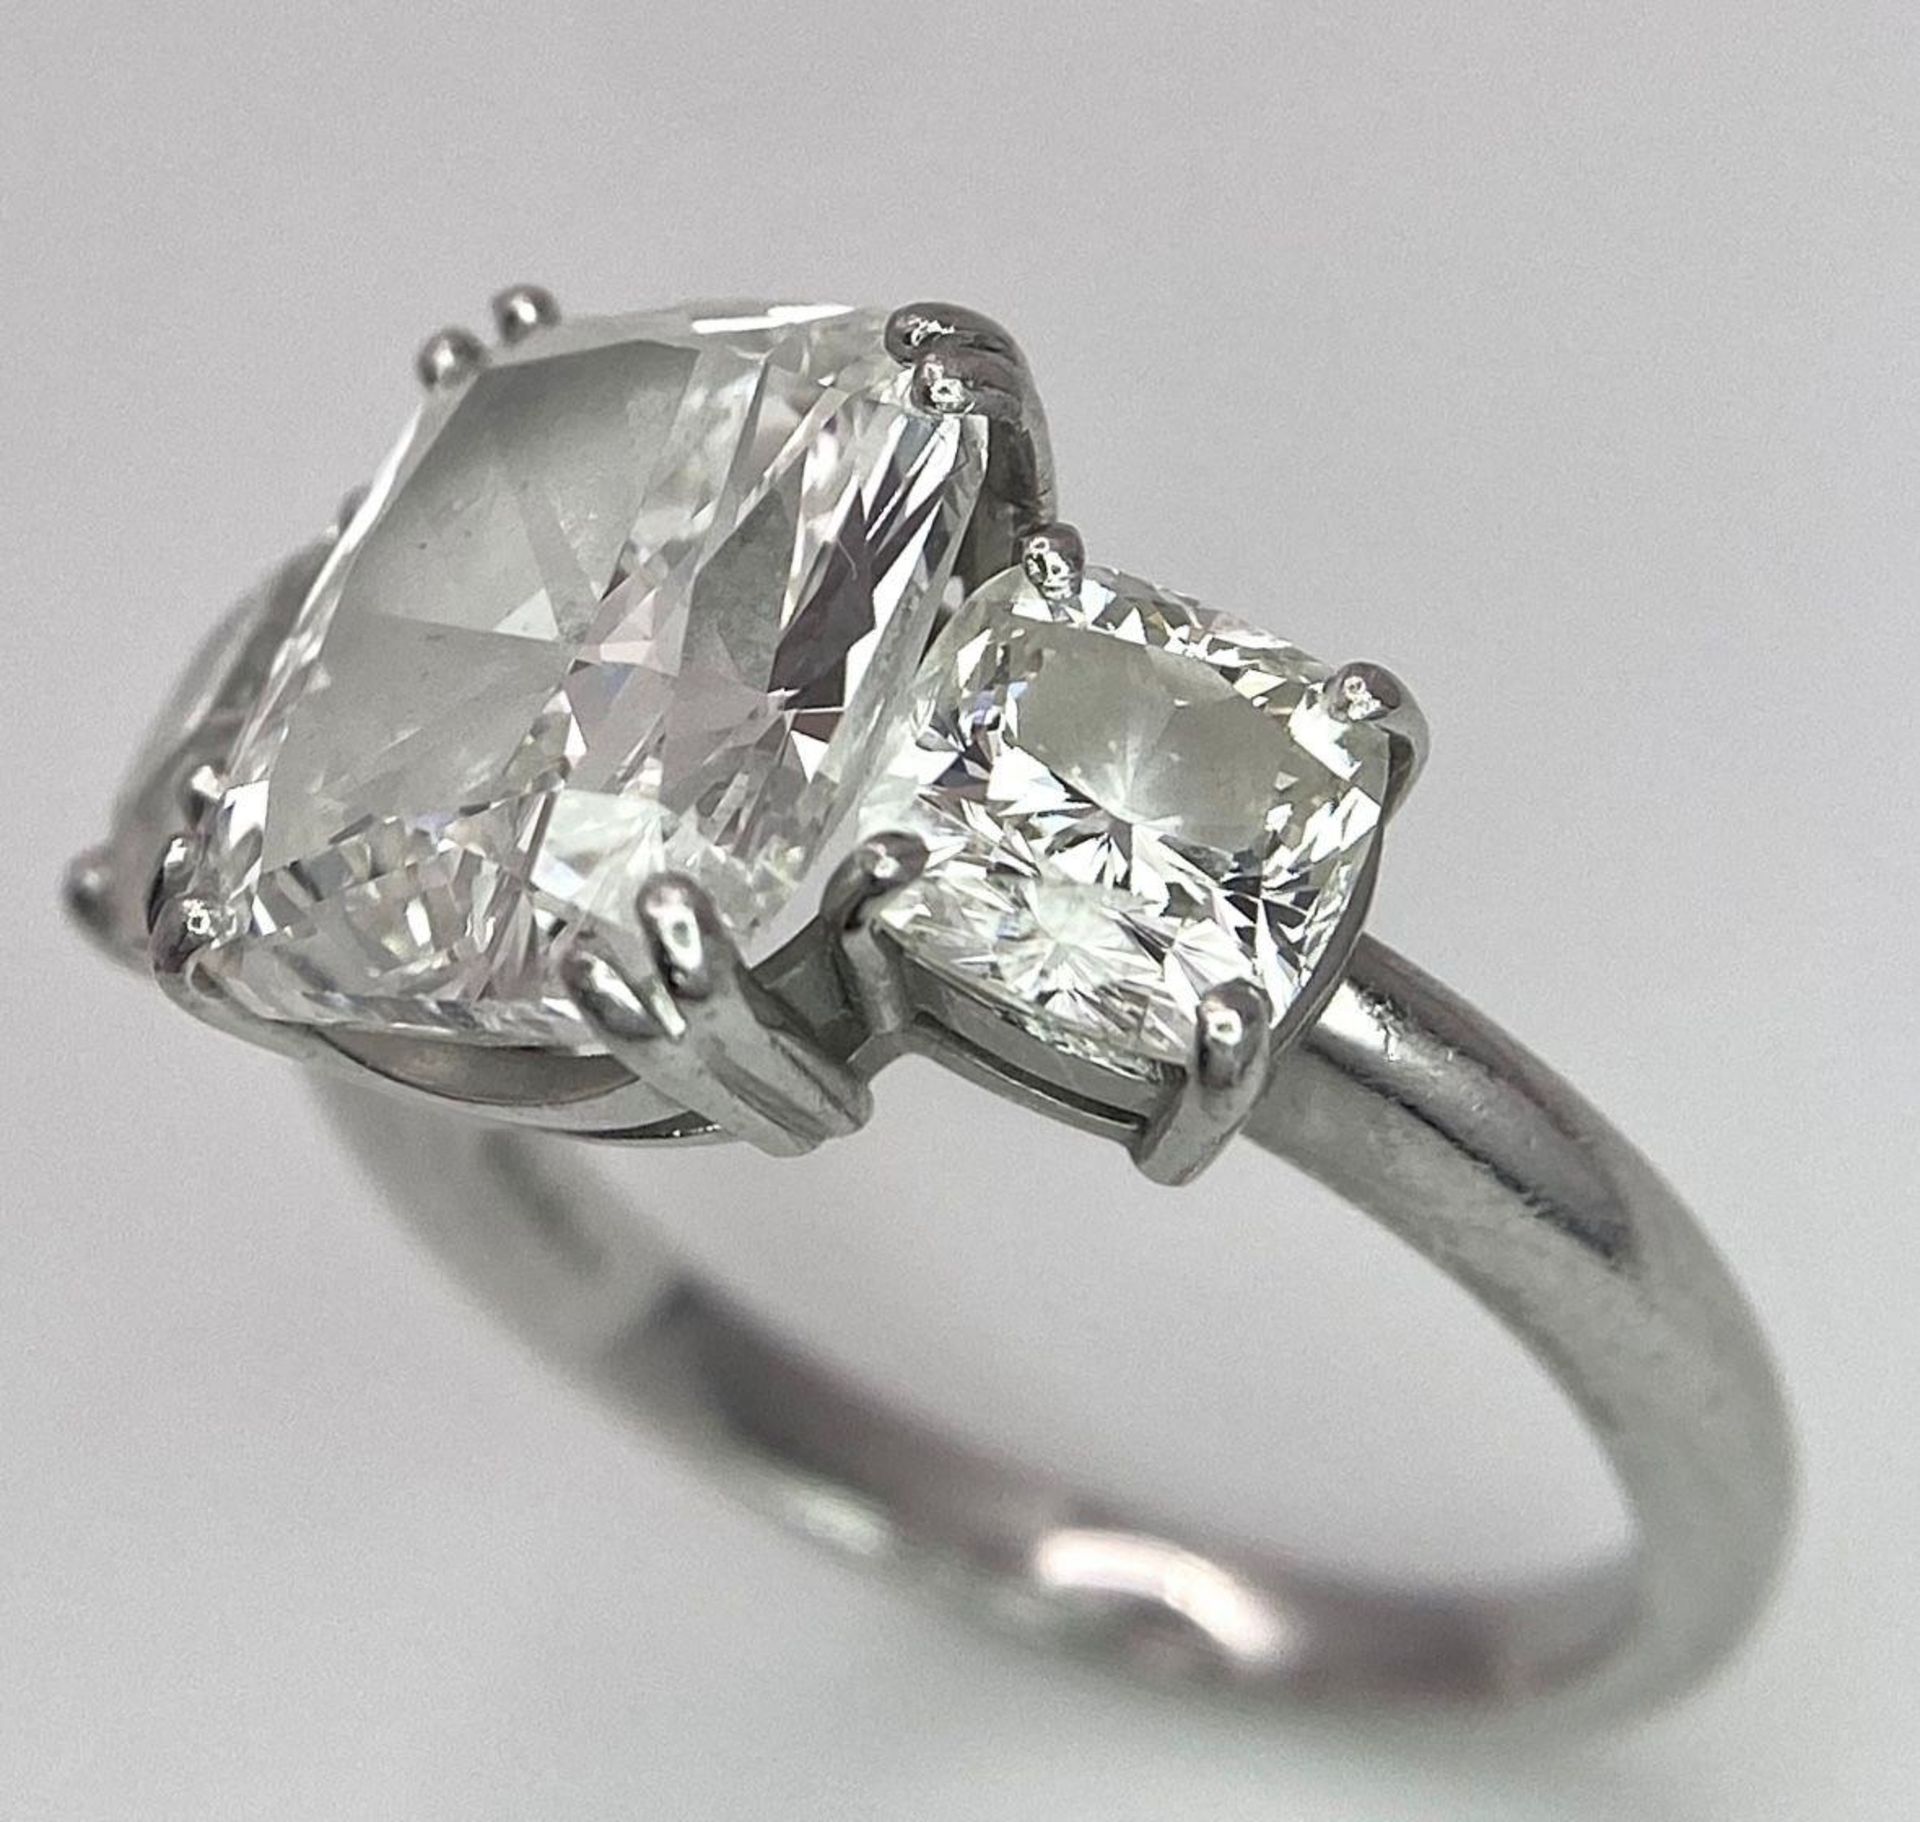 A Breathtaking 4.01ct GIA Certified Diamond Ring. A brilliant cushion cut 4.01ct central diamond - Image 7 of 21